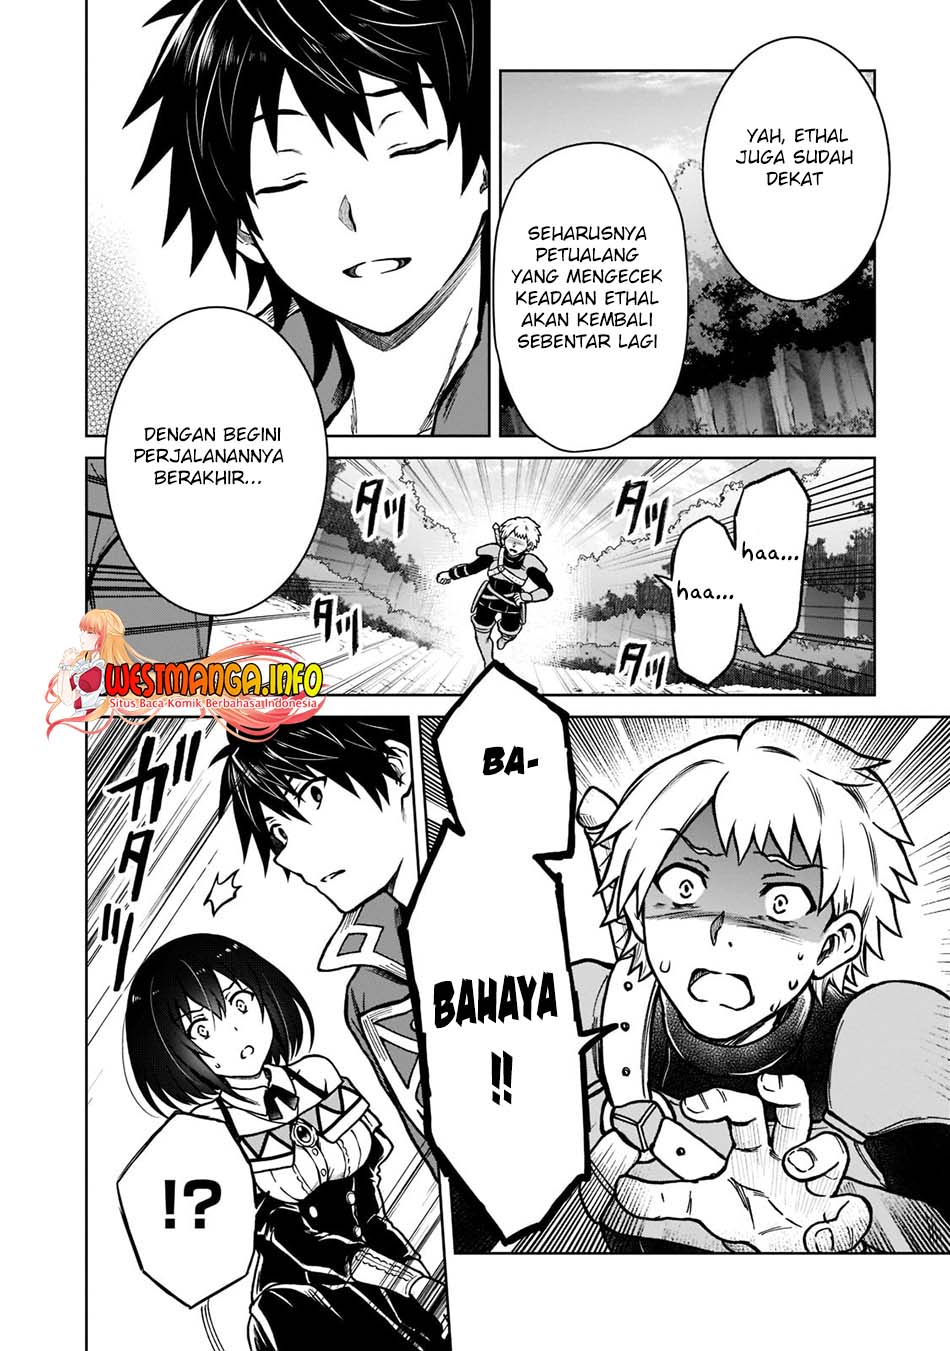 Dilarang COPAS - situs resmi www.mangacanblog.com - Komik d rank adventurer invited by a brave party and the stalking princess 008 - chapter 8 9 Indonesia d rank adventurer invited by a brave party and the stalking princess 008 - chapter 8 Terbaru 24|Baca Manga Komik Indonesia|Mangacan